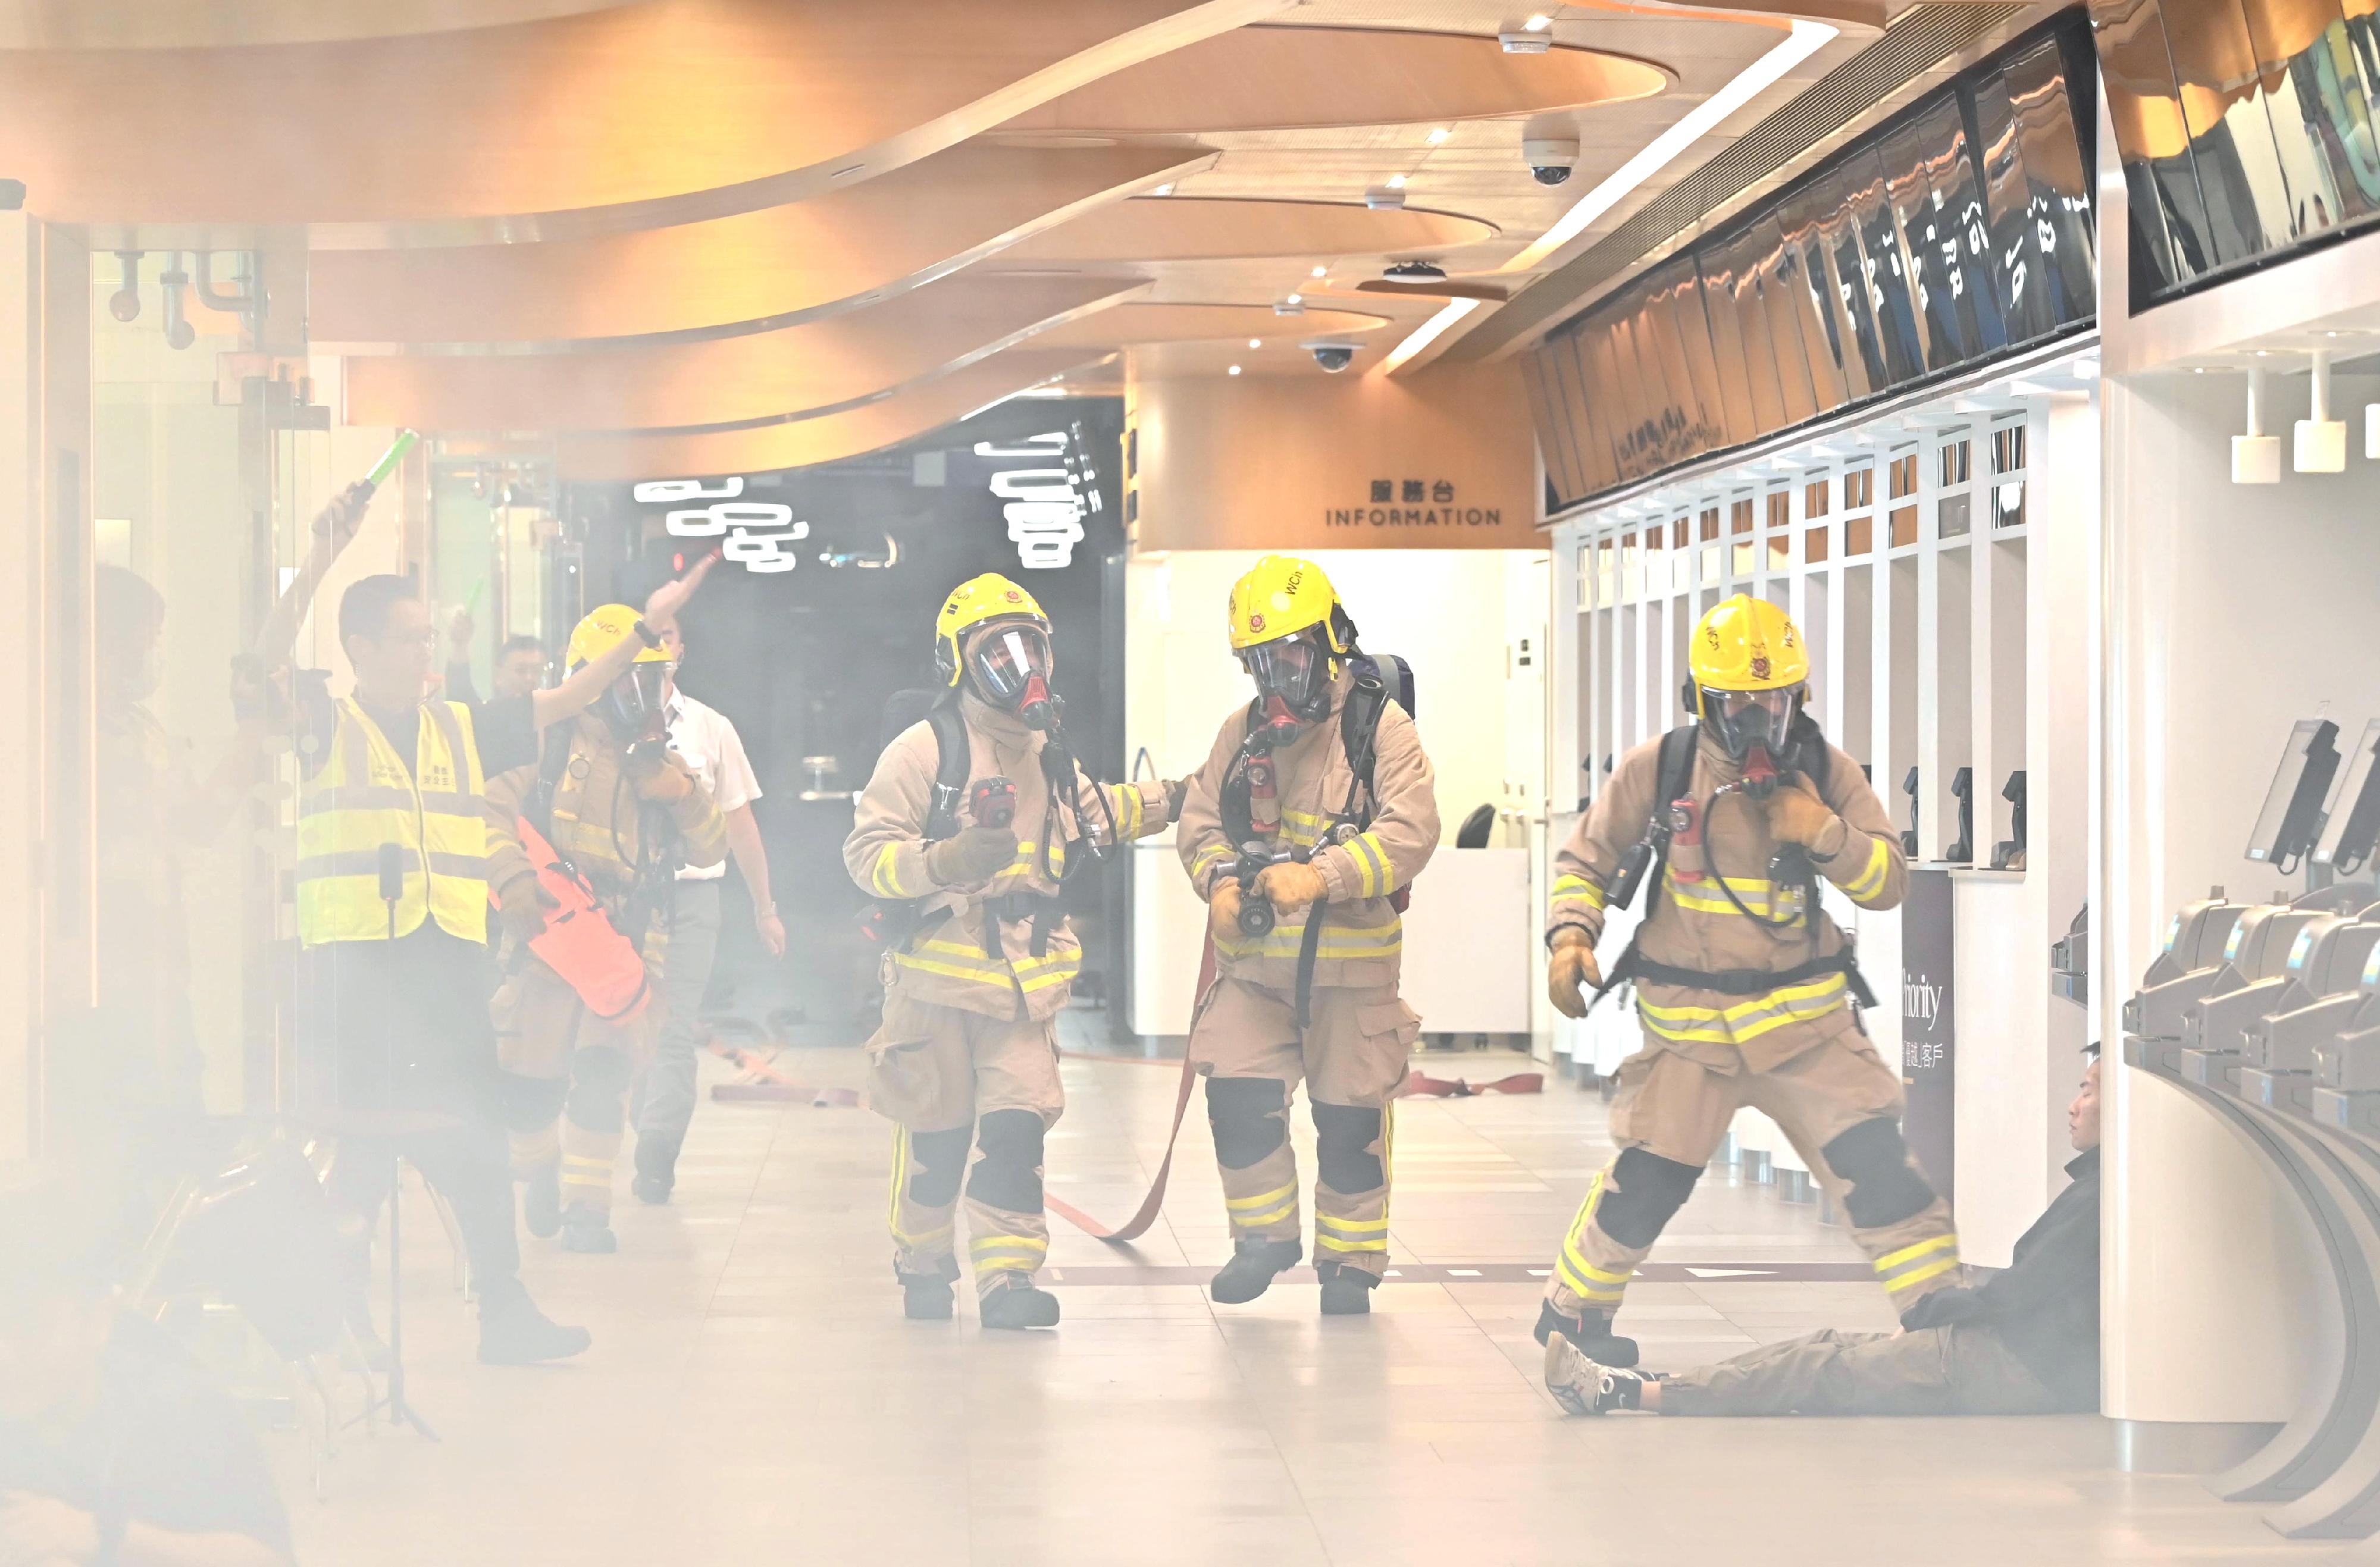 Police Hong Kong Island Regional Headquarters conducted an inter-departmental major incident exercise codenamed "BROKENPIN" with the Fire Services Department (FSD), Hospital Authority, Hong Kong Jockey Club, St. John Ambulance Brigade and Hong Kong Association for Conflict and Catastrophe Medicine at Happy Valley Racecourse this afternoon (November 23). Picture shows FSD personnel fighting fire.